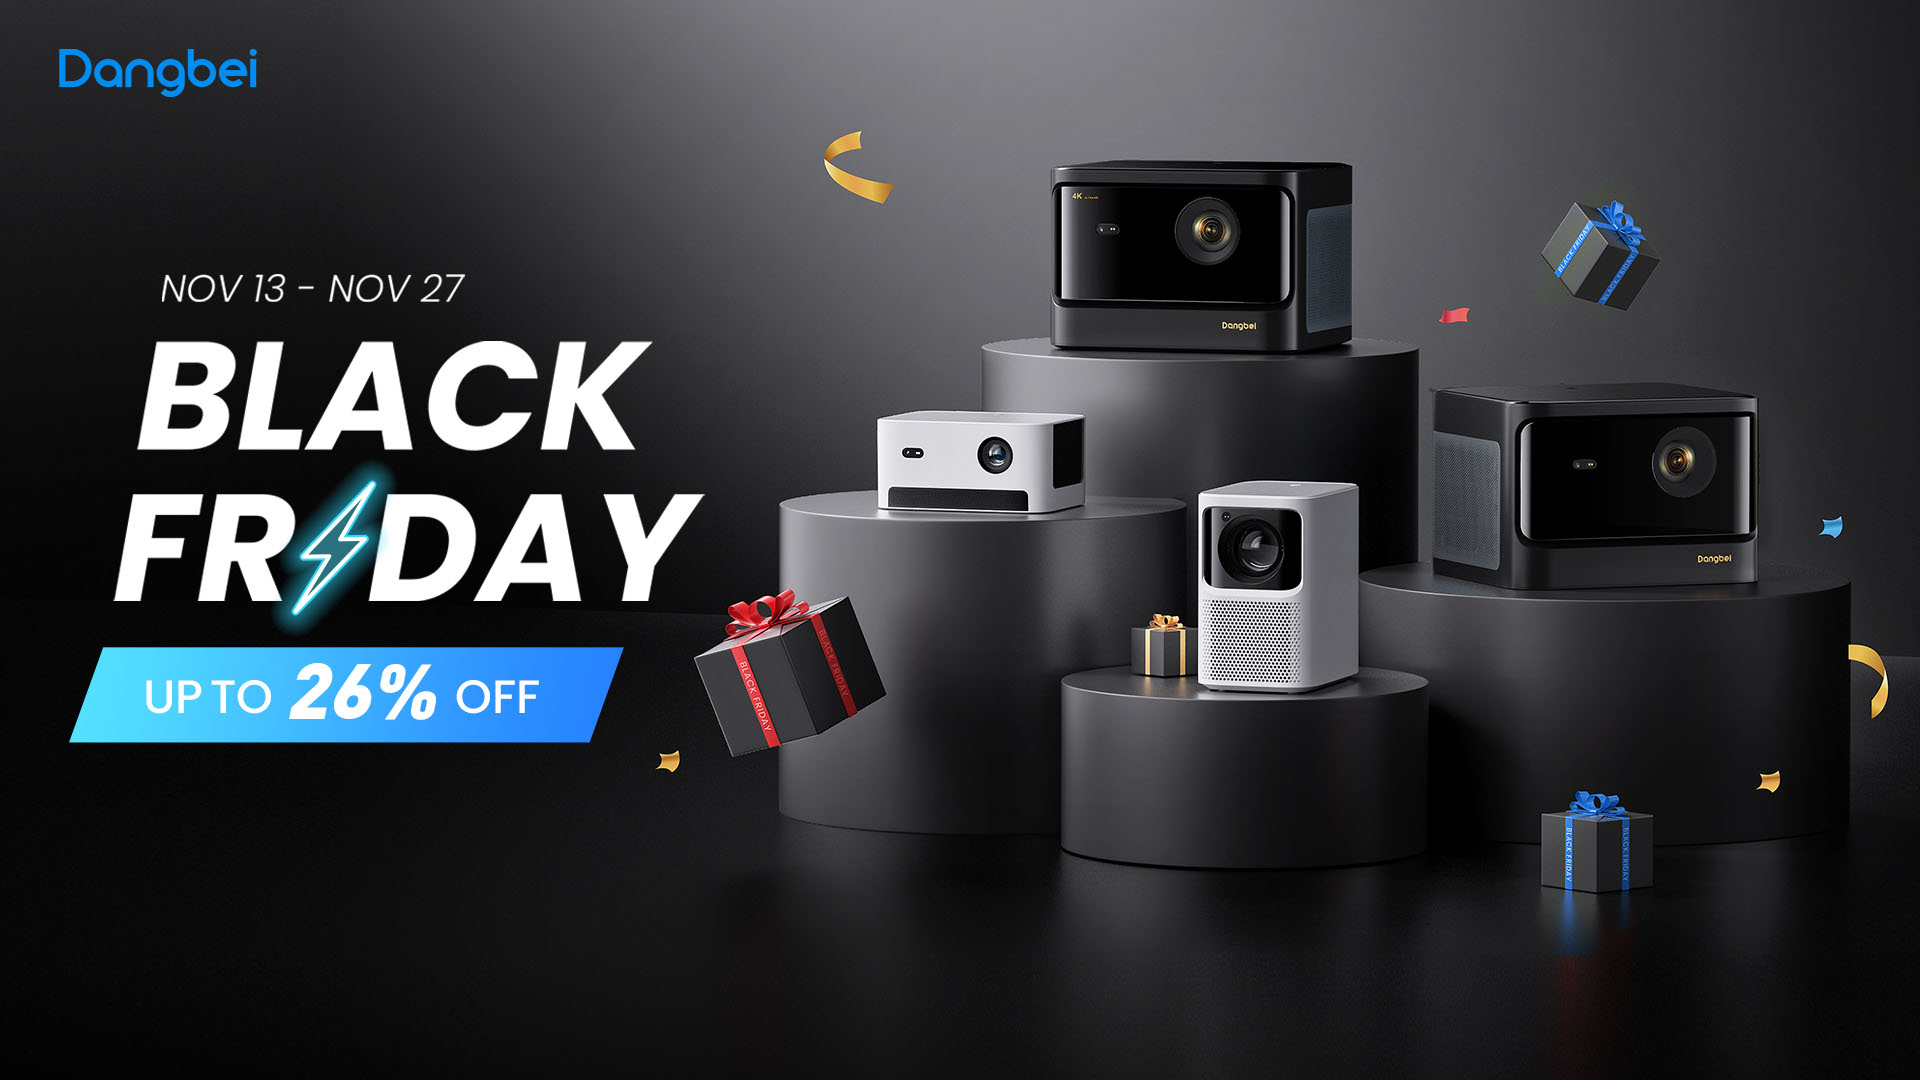 Dangbei Smart Projectors on Sale – Up to 8 (USA) 26 percent (UK) discount for Black Friday and Cyber Monday